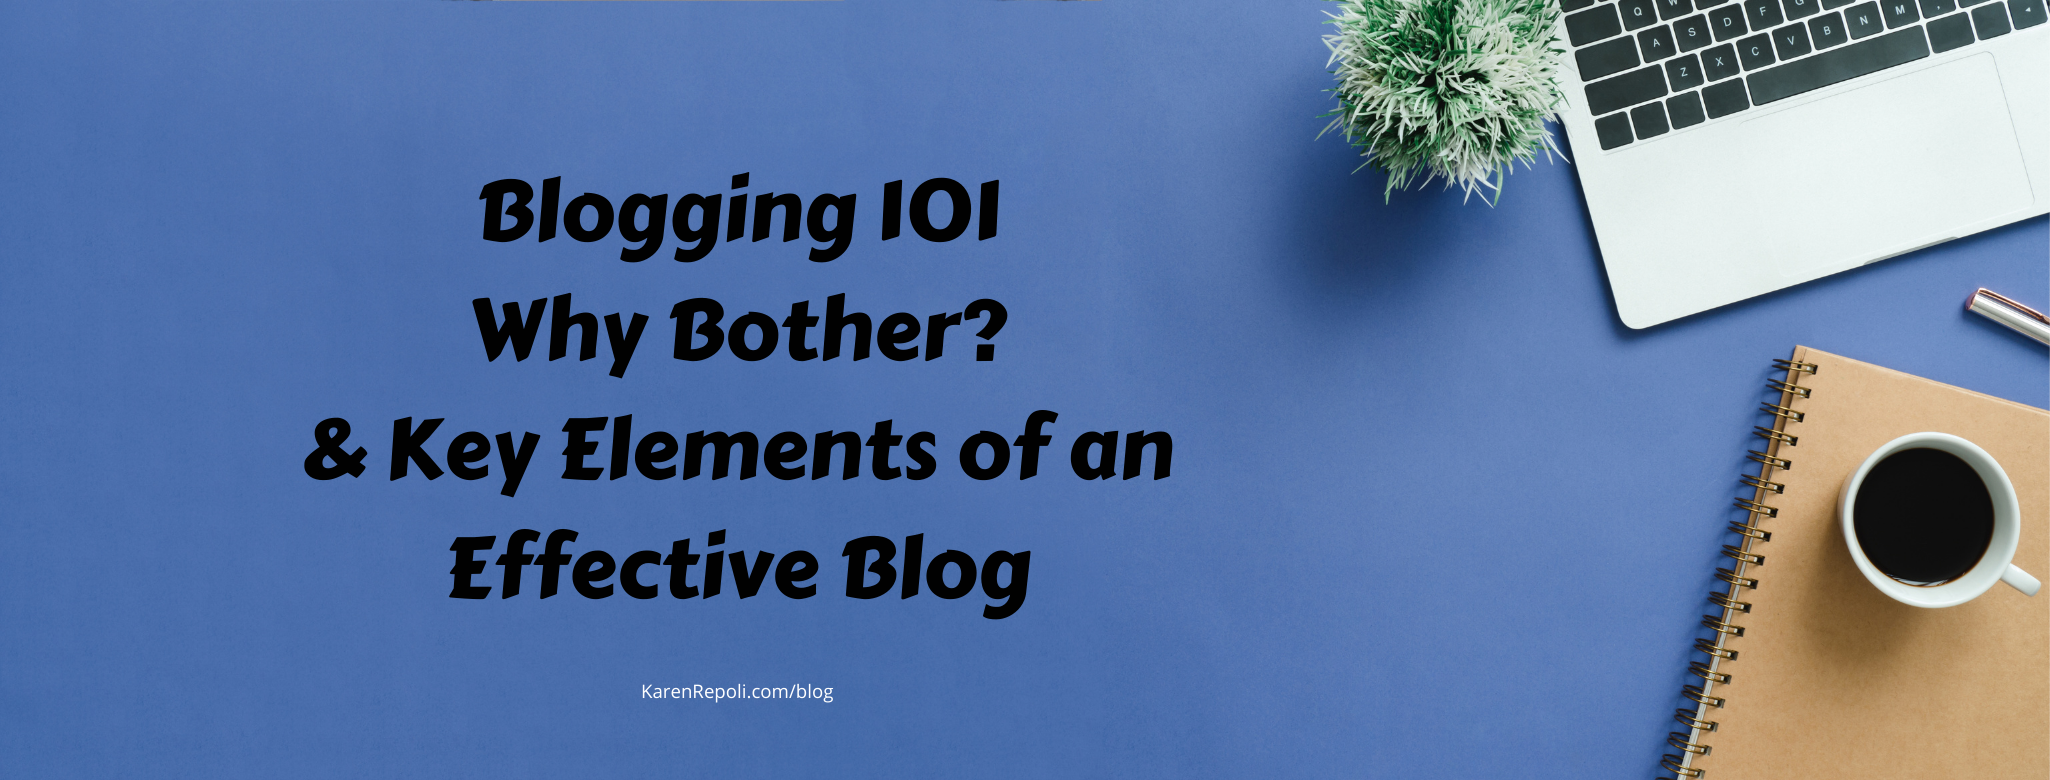 Blogging 101: Why Bother & Key Elements of an Effective Blog